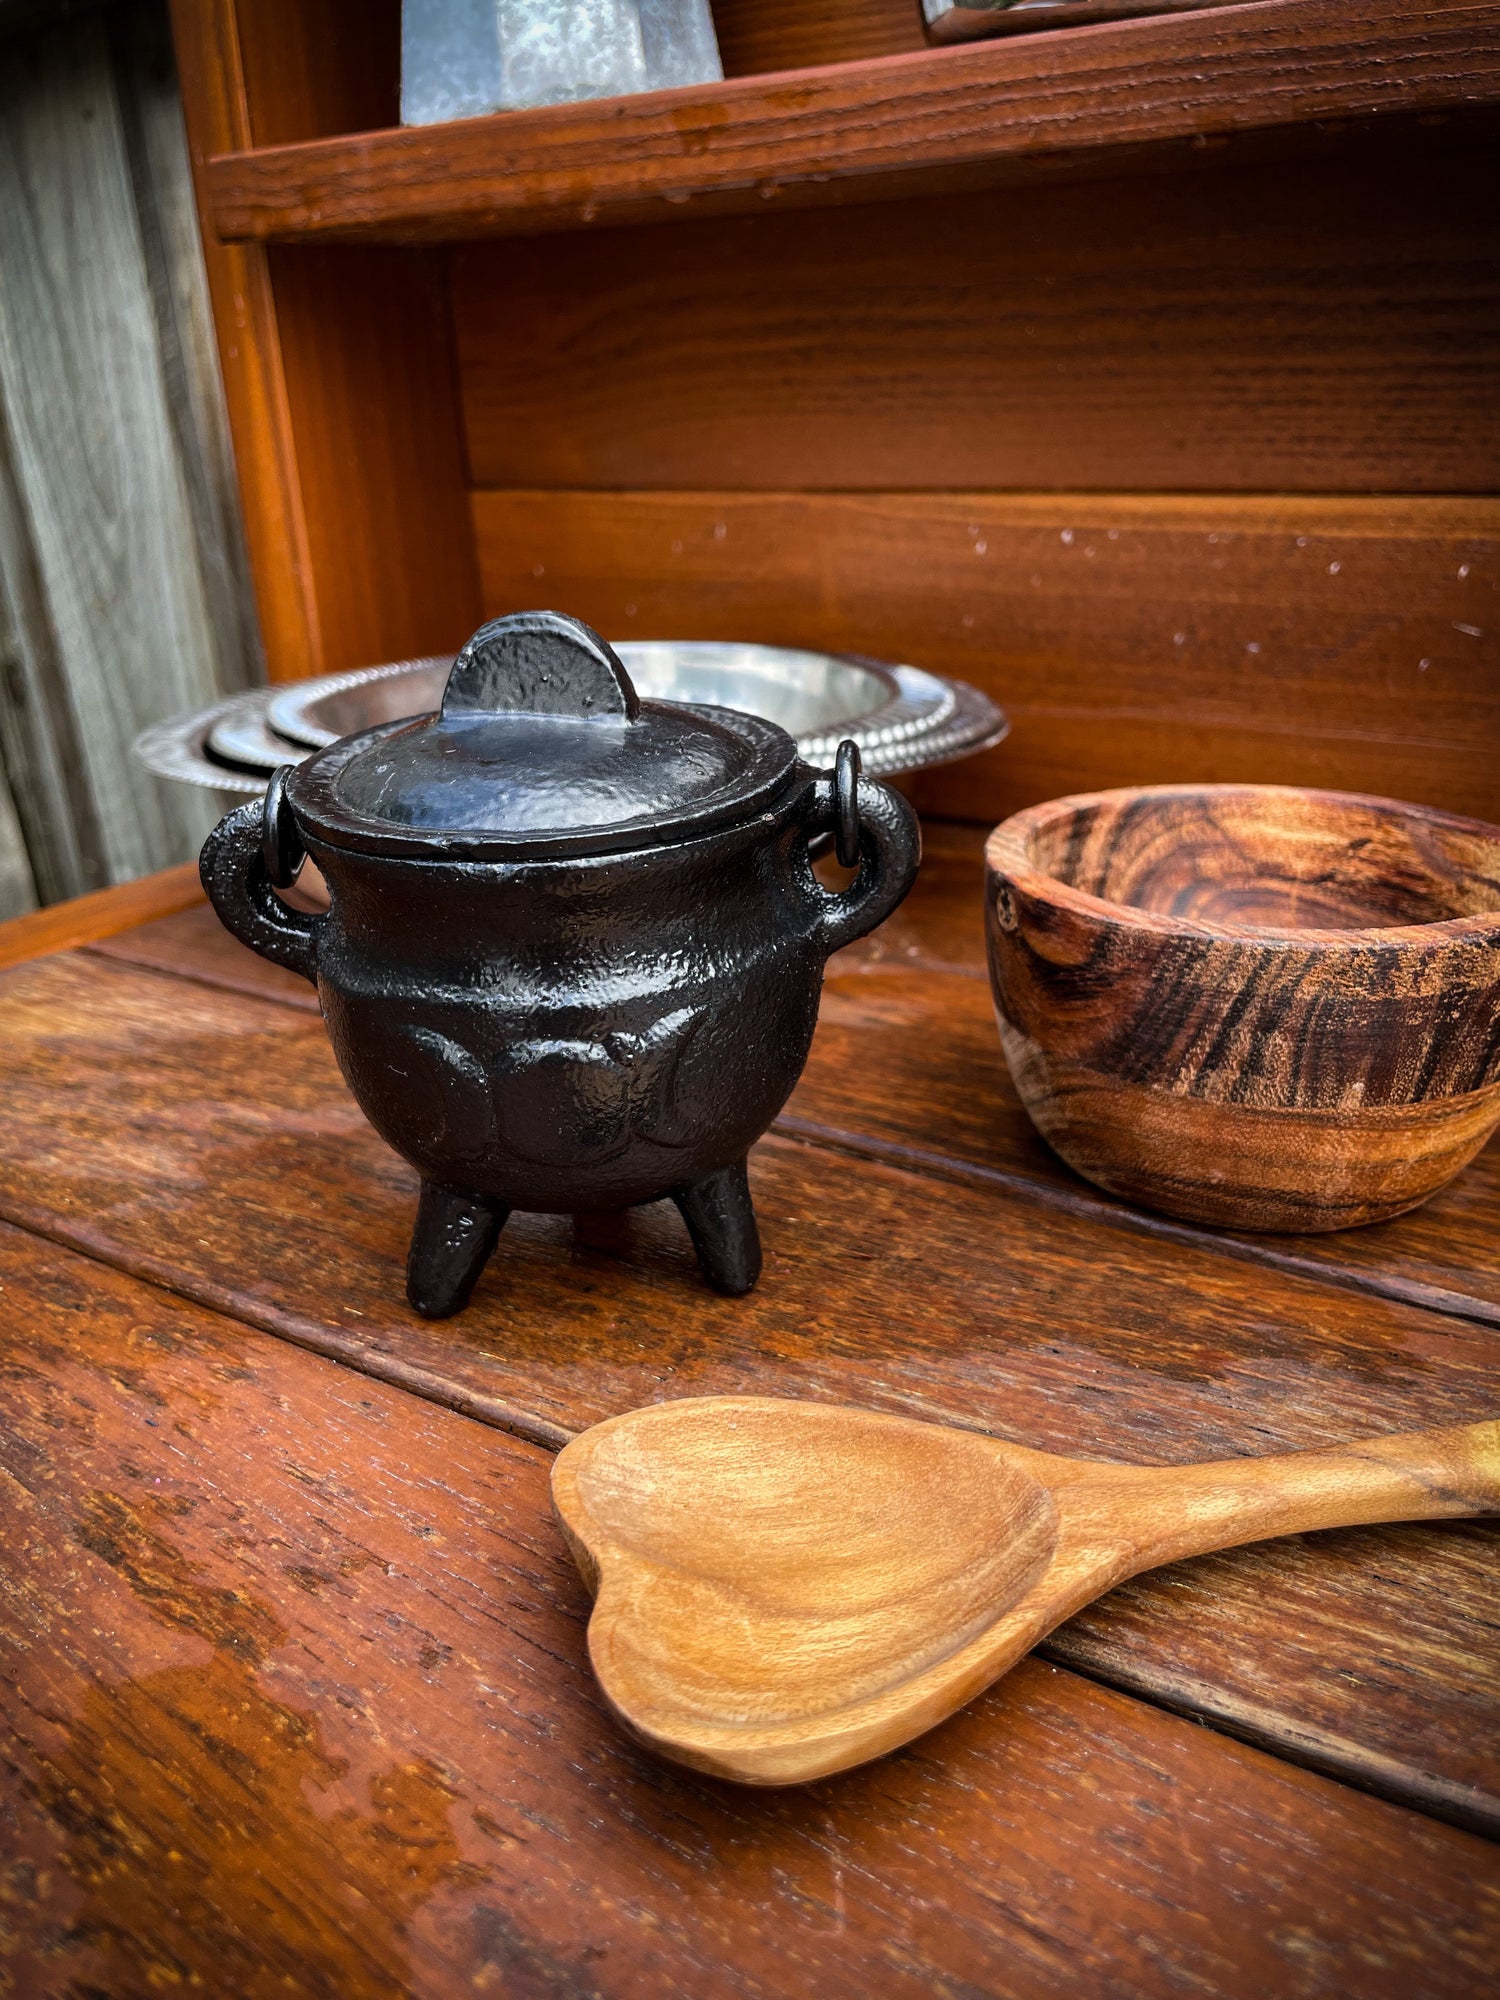 THE PLAYFUL COLLECTIVE | MINI TRIPLE MOON CAST IRON CAULDRON - BLACK by THE PLAYFUL COLLECTIVE - The Playful Collective